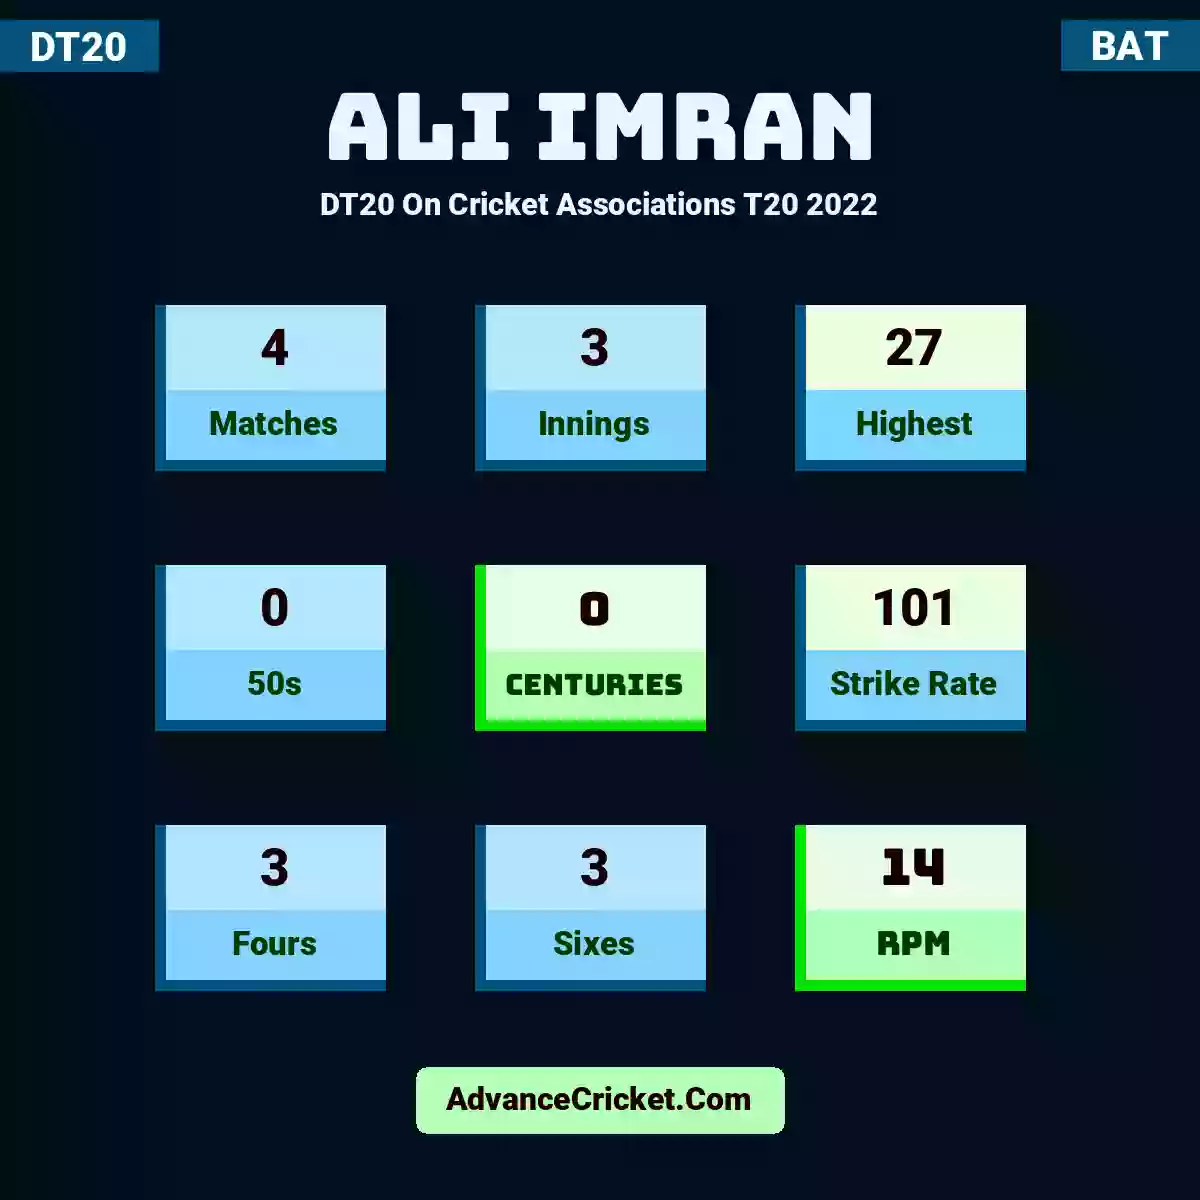 Ali Imran DT20  On Cricket Associations T20 2022, Ali Imran played 4 matches, scored 27 runs as highest, 0 half-centuries, and 0 centuries, with a strike rate of 101. A.Imran hit 3 fours and 3 sixes, with an RPM of 14.